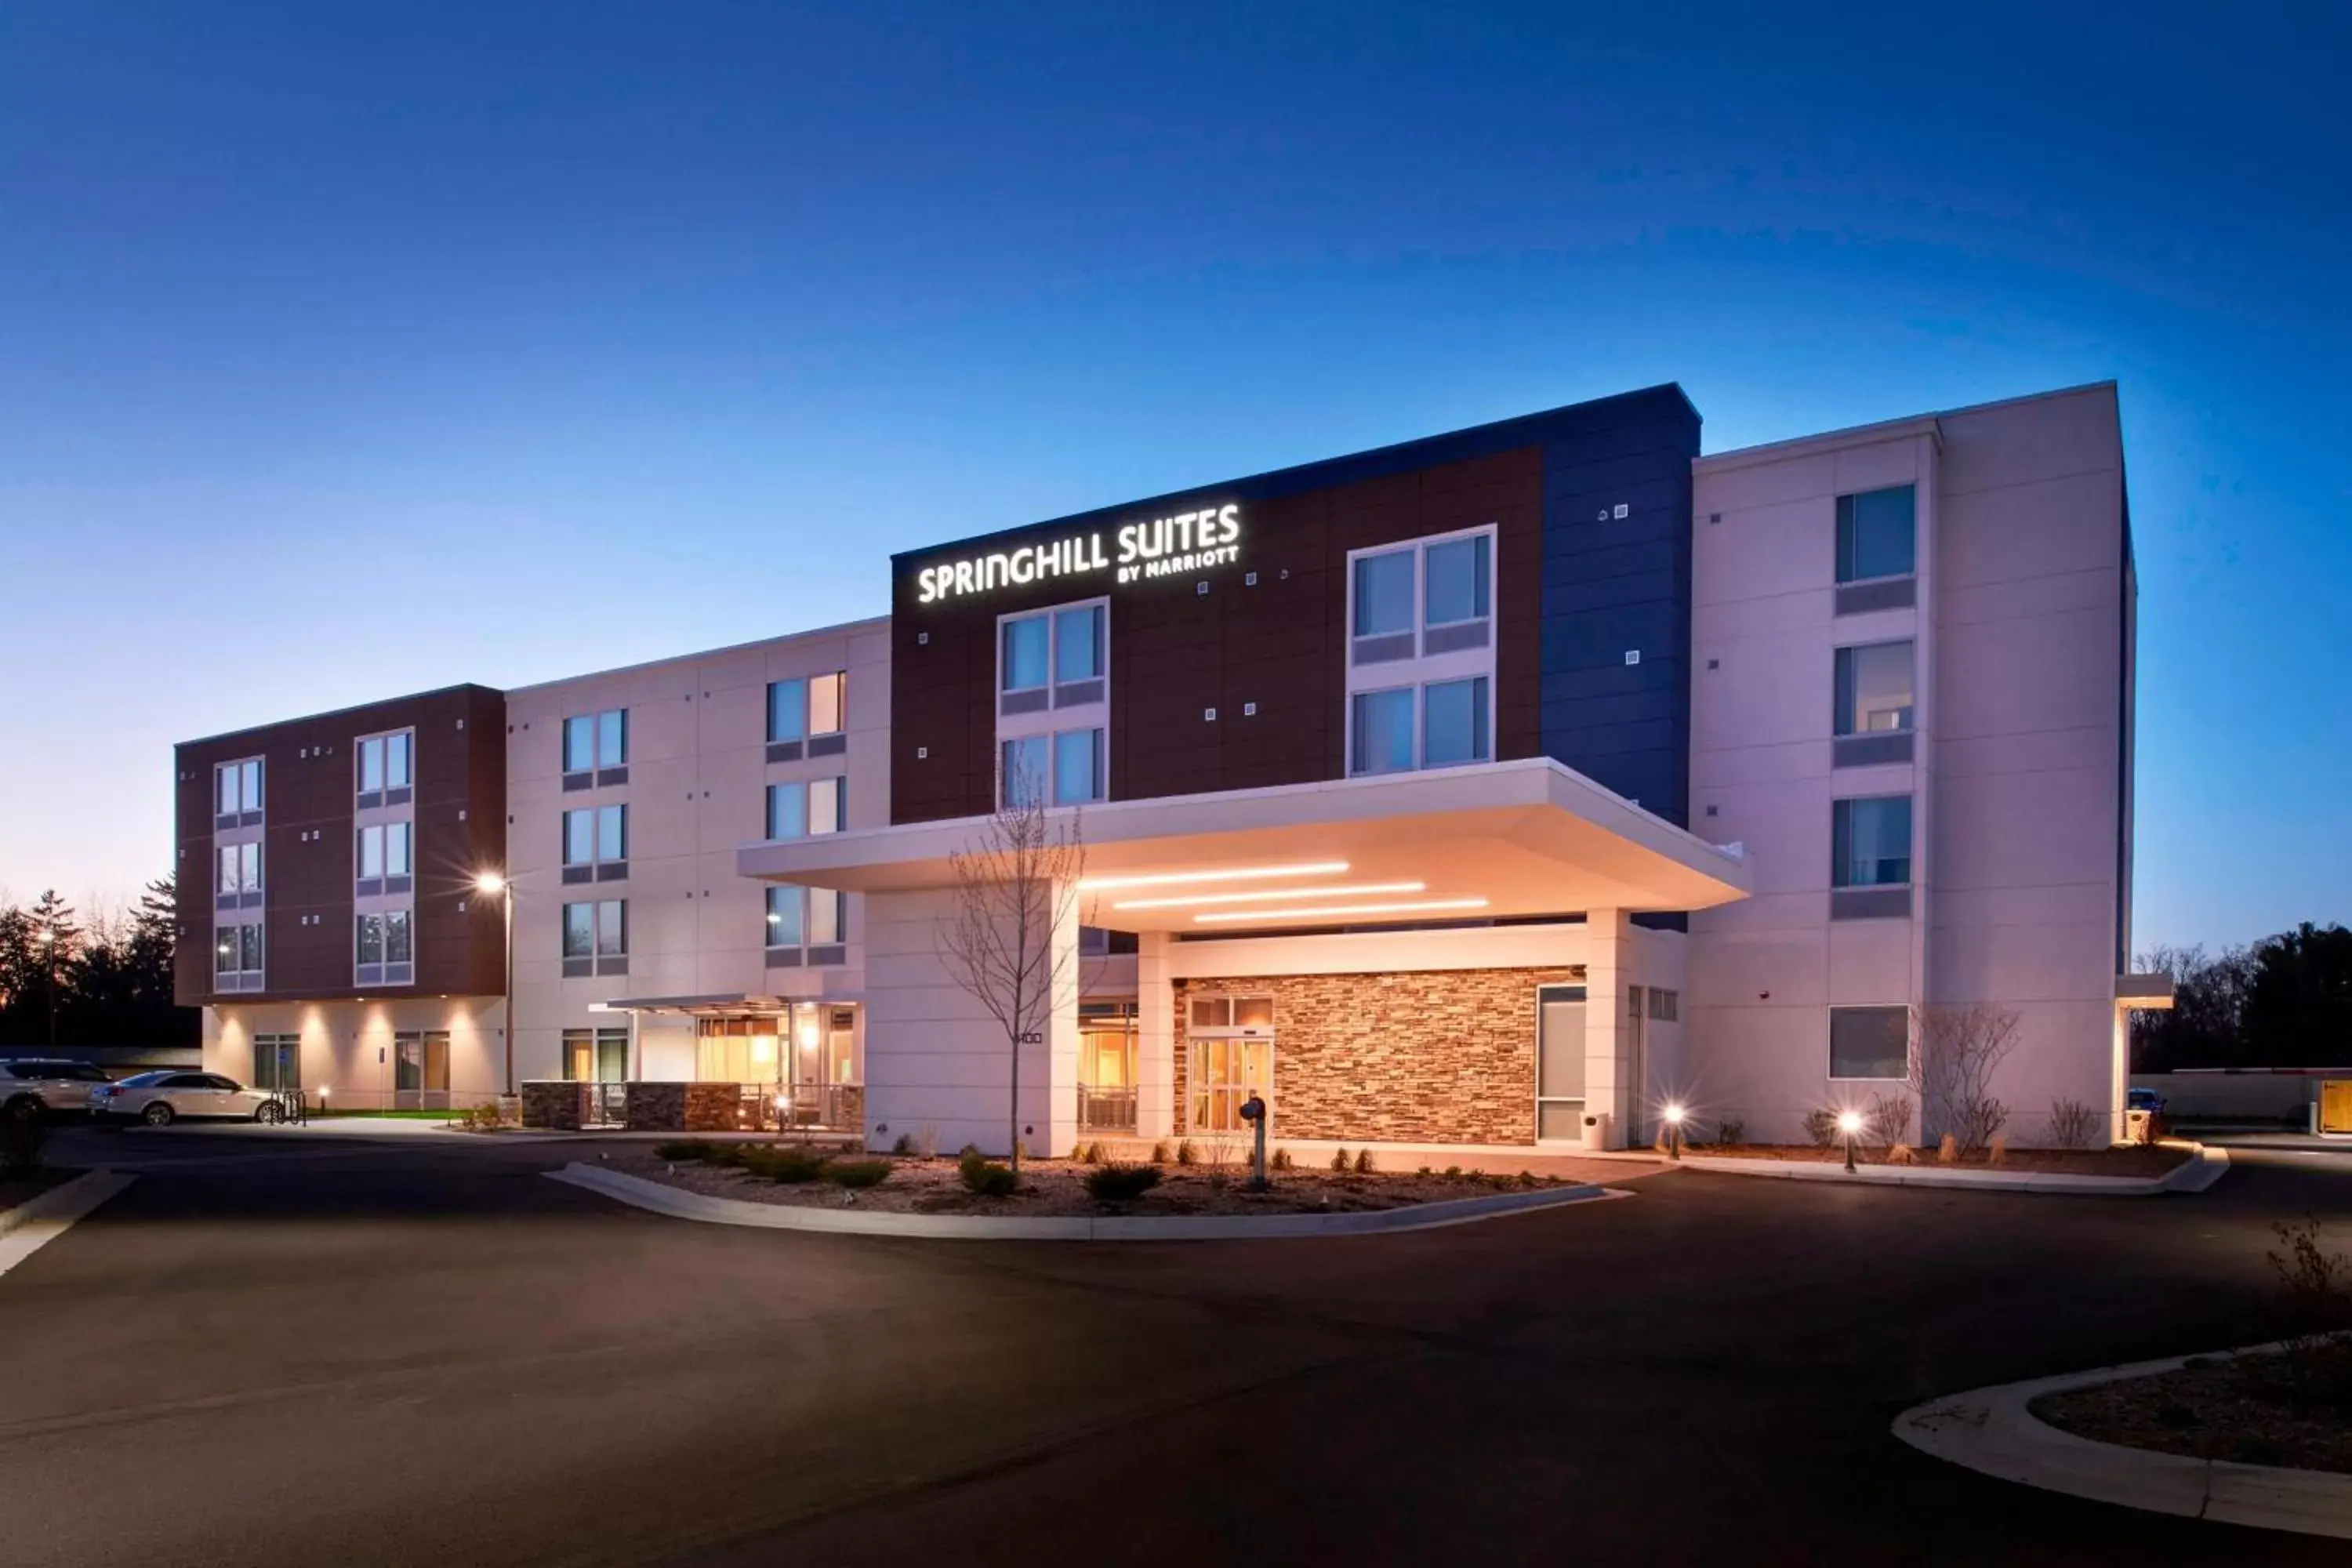 Property Building in SpringHill Suites by Marriott East Lansing University Area, Lansing Area